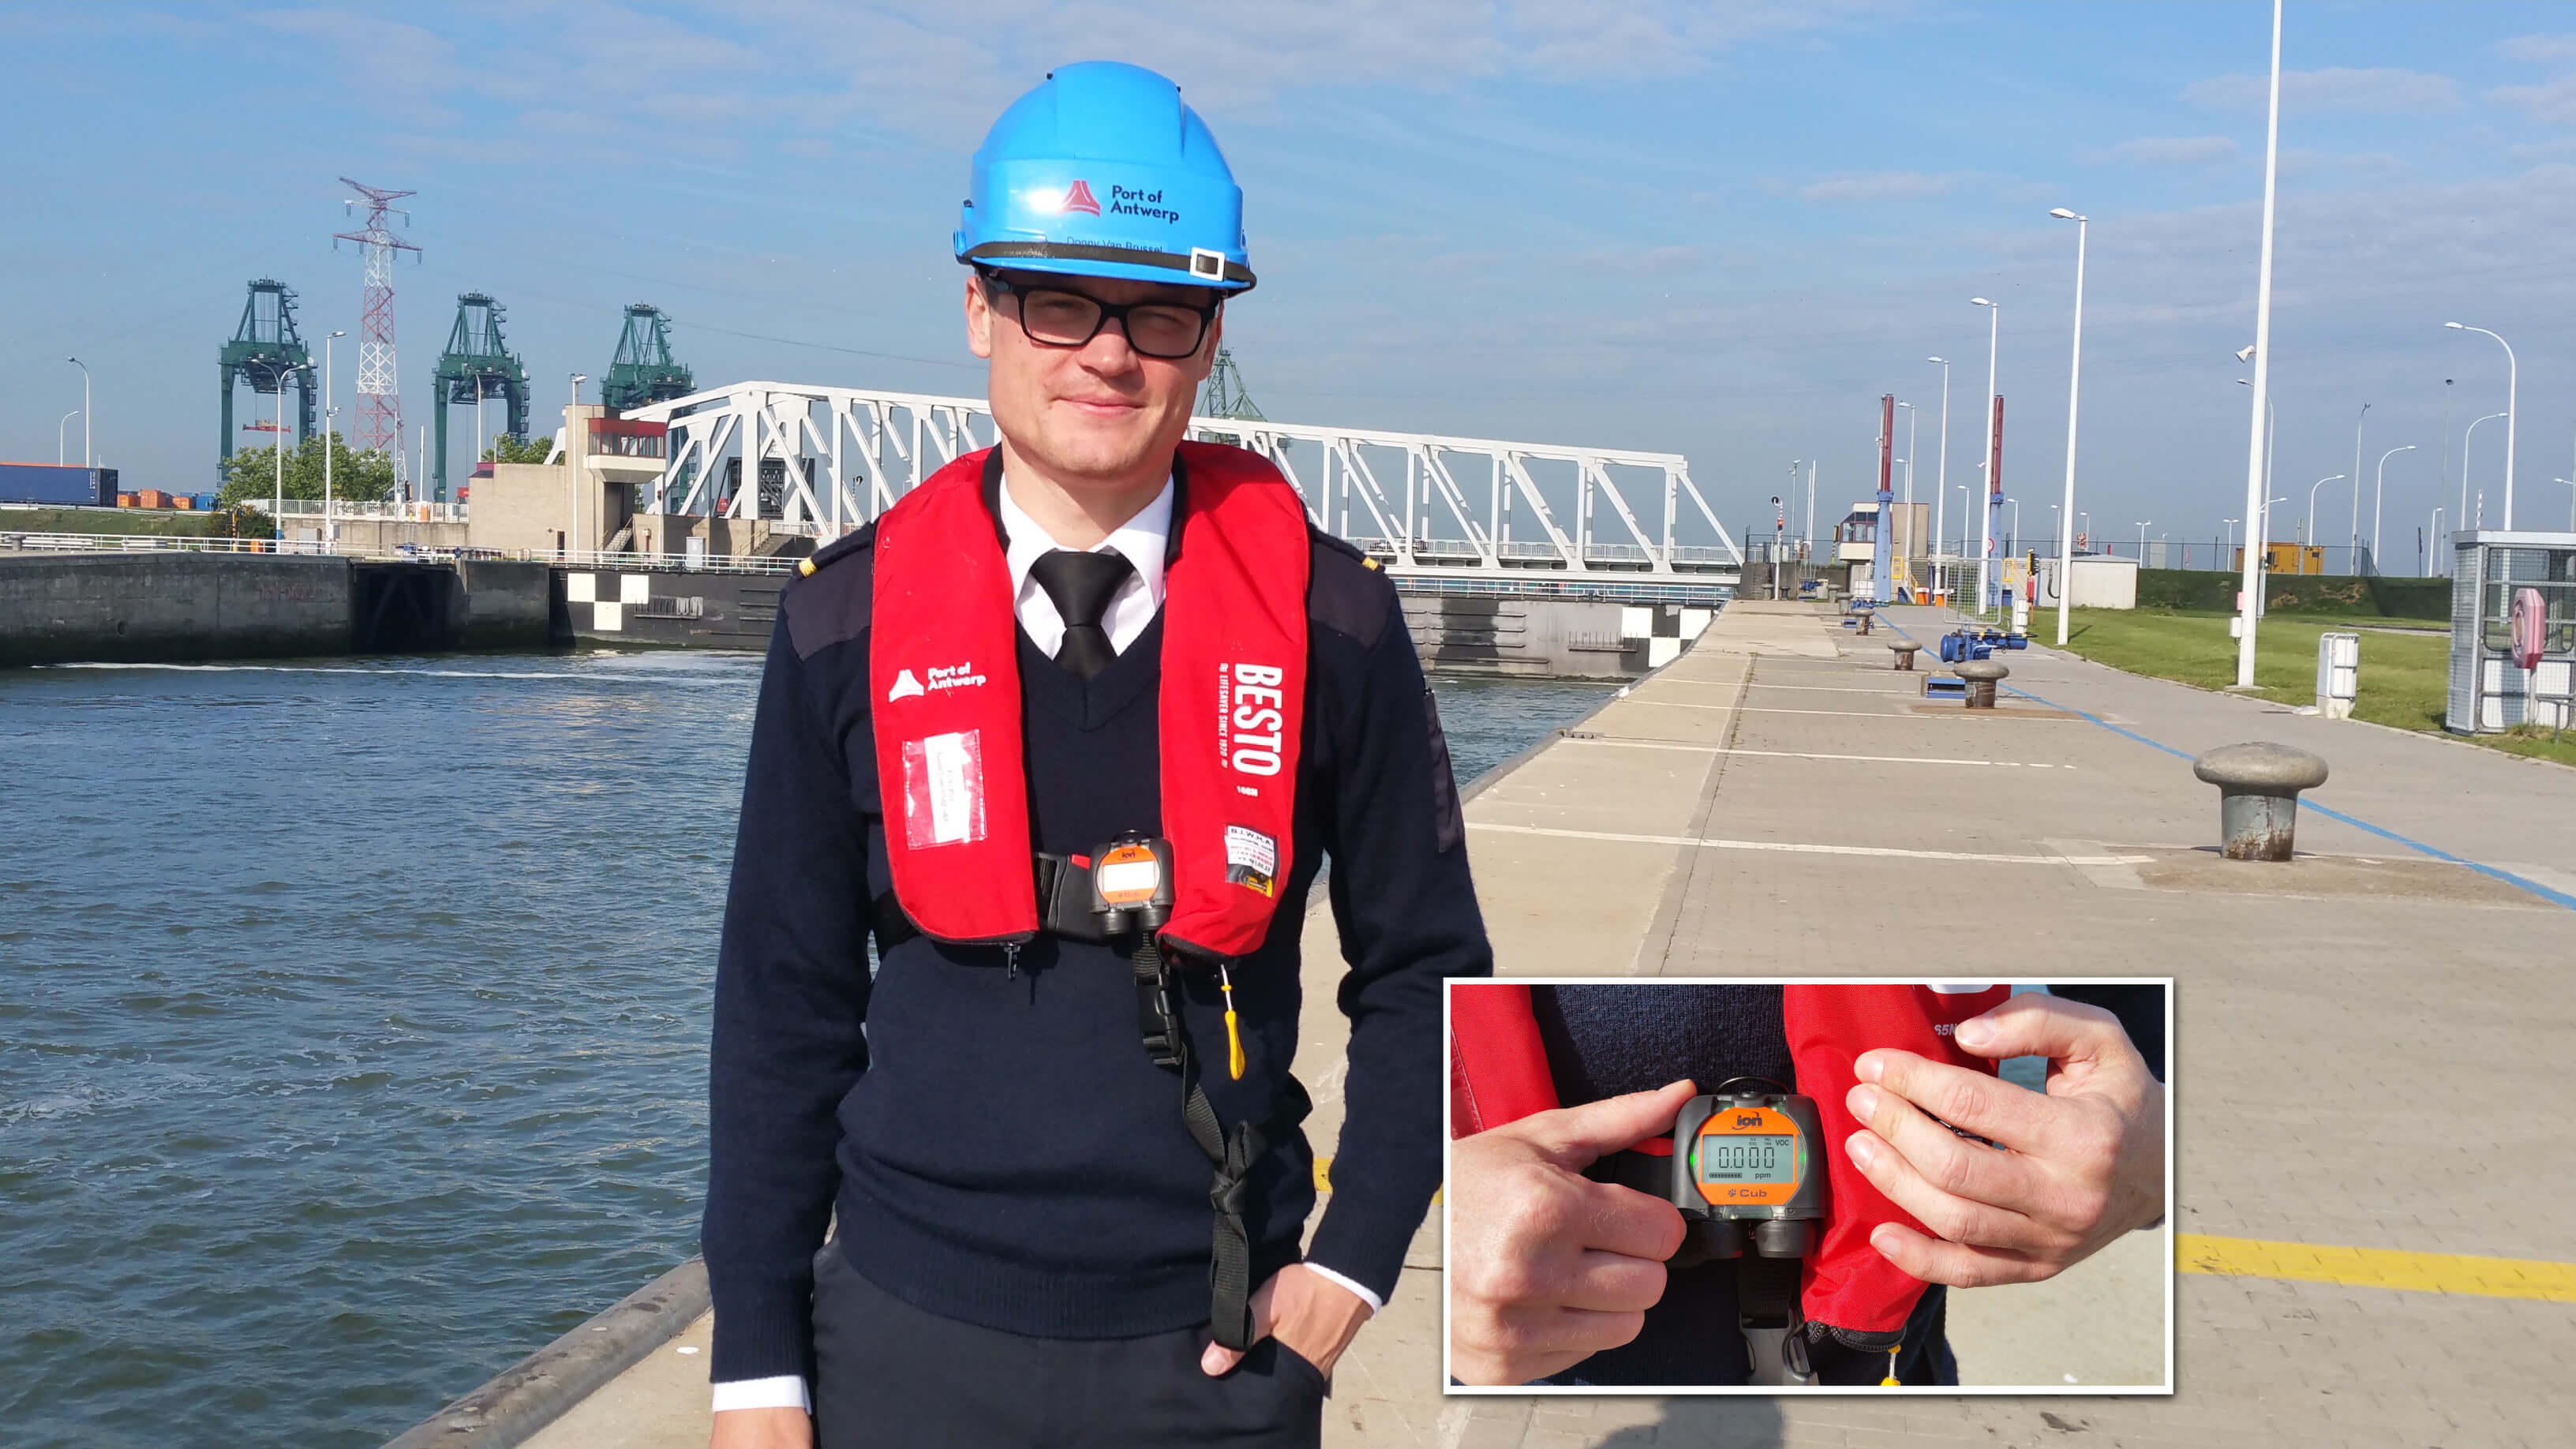 Protecting Port of Antwerp employees from hazardous gases.